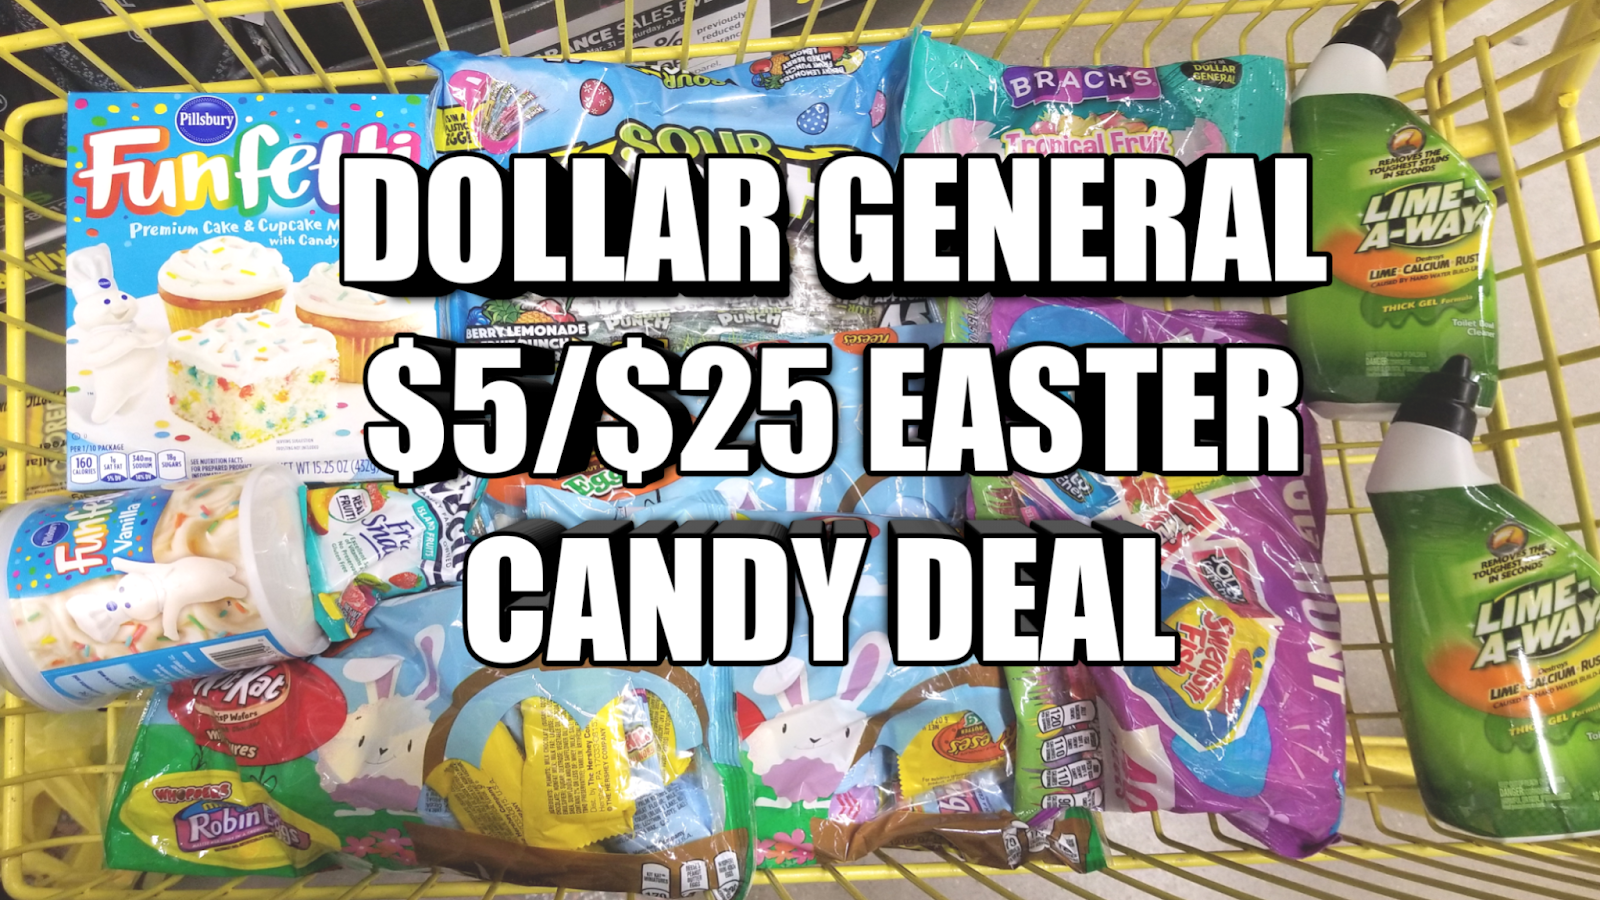 DOLLAR GENERAL 5/25 EASTER CANDY DEAL